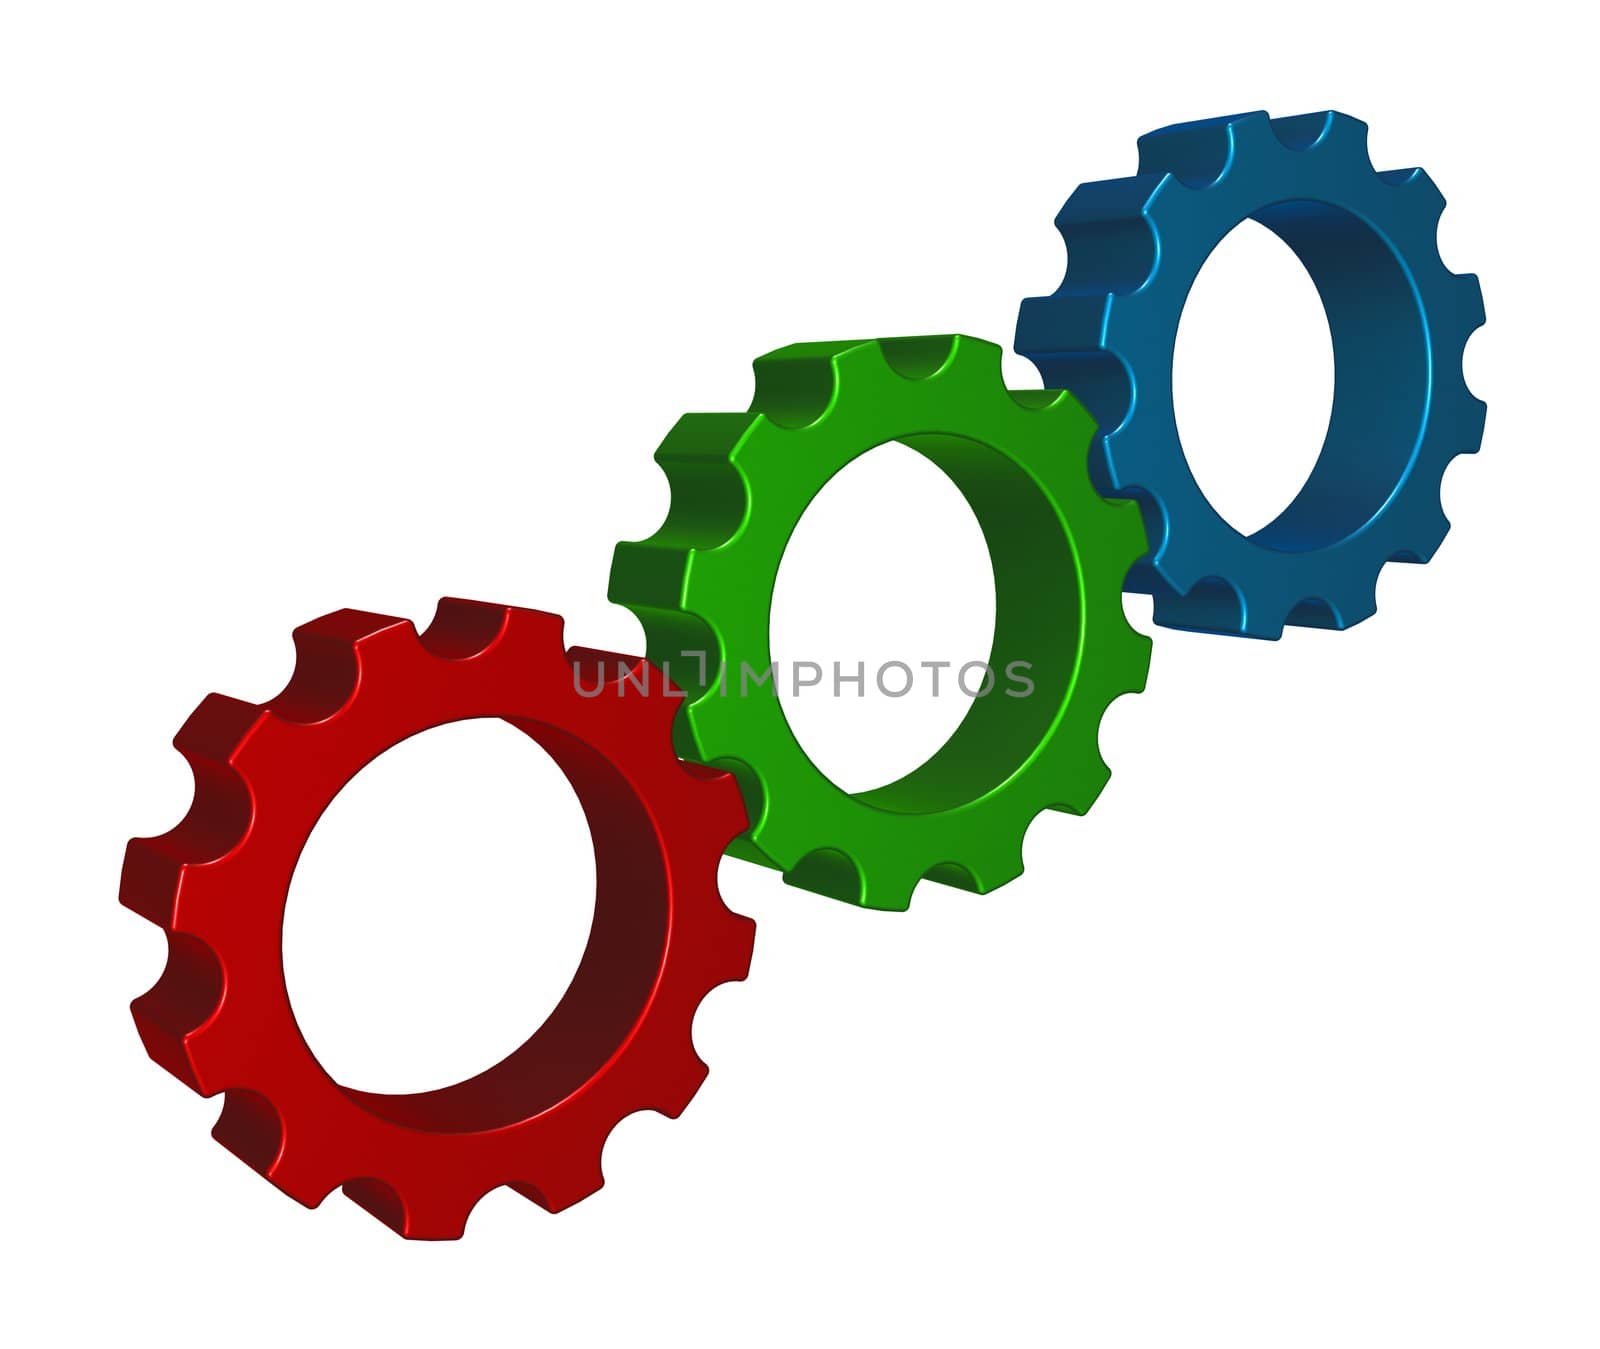 gear wheels in rgb colors on white background - 3d illustration